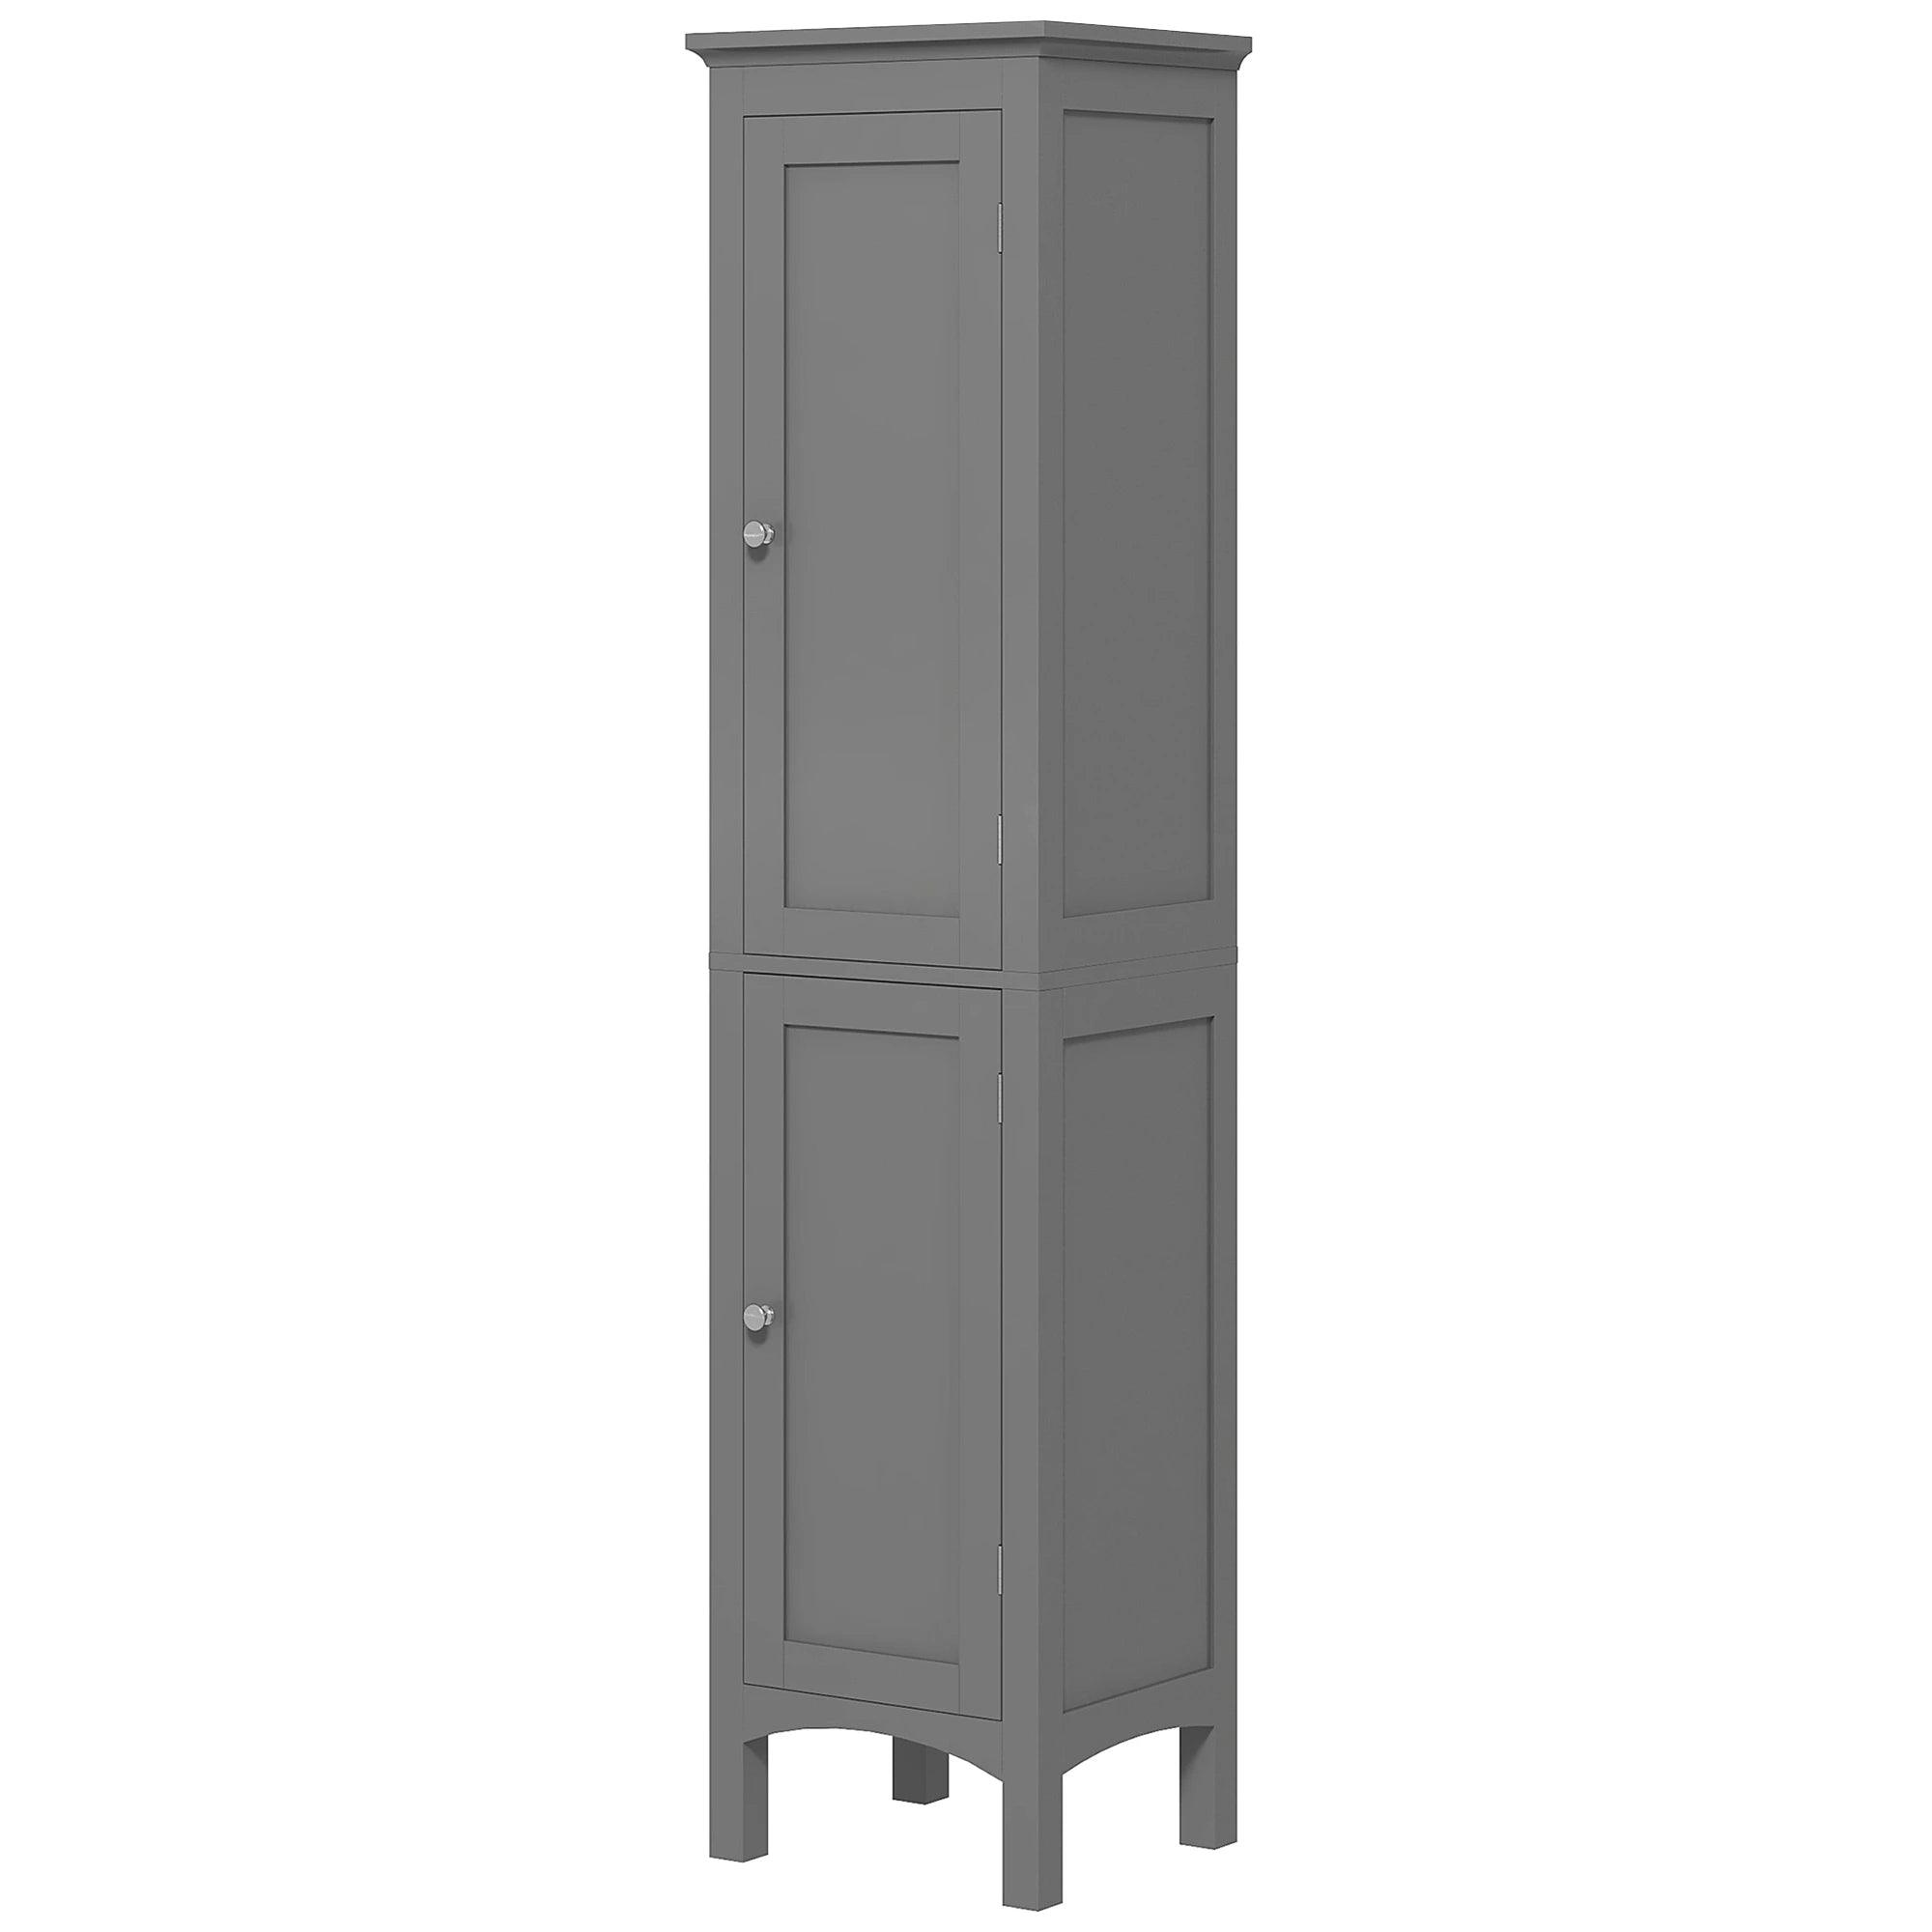 Tall Bathroom Cabinet, Freestanding Storage Organizer with Adjustable Shelves and Cupboards, 15